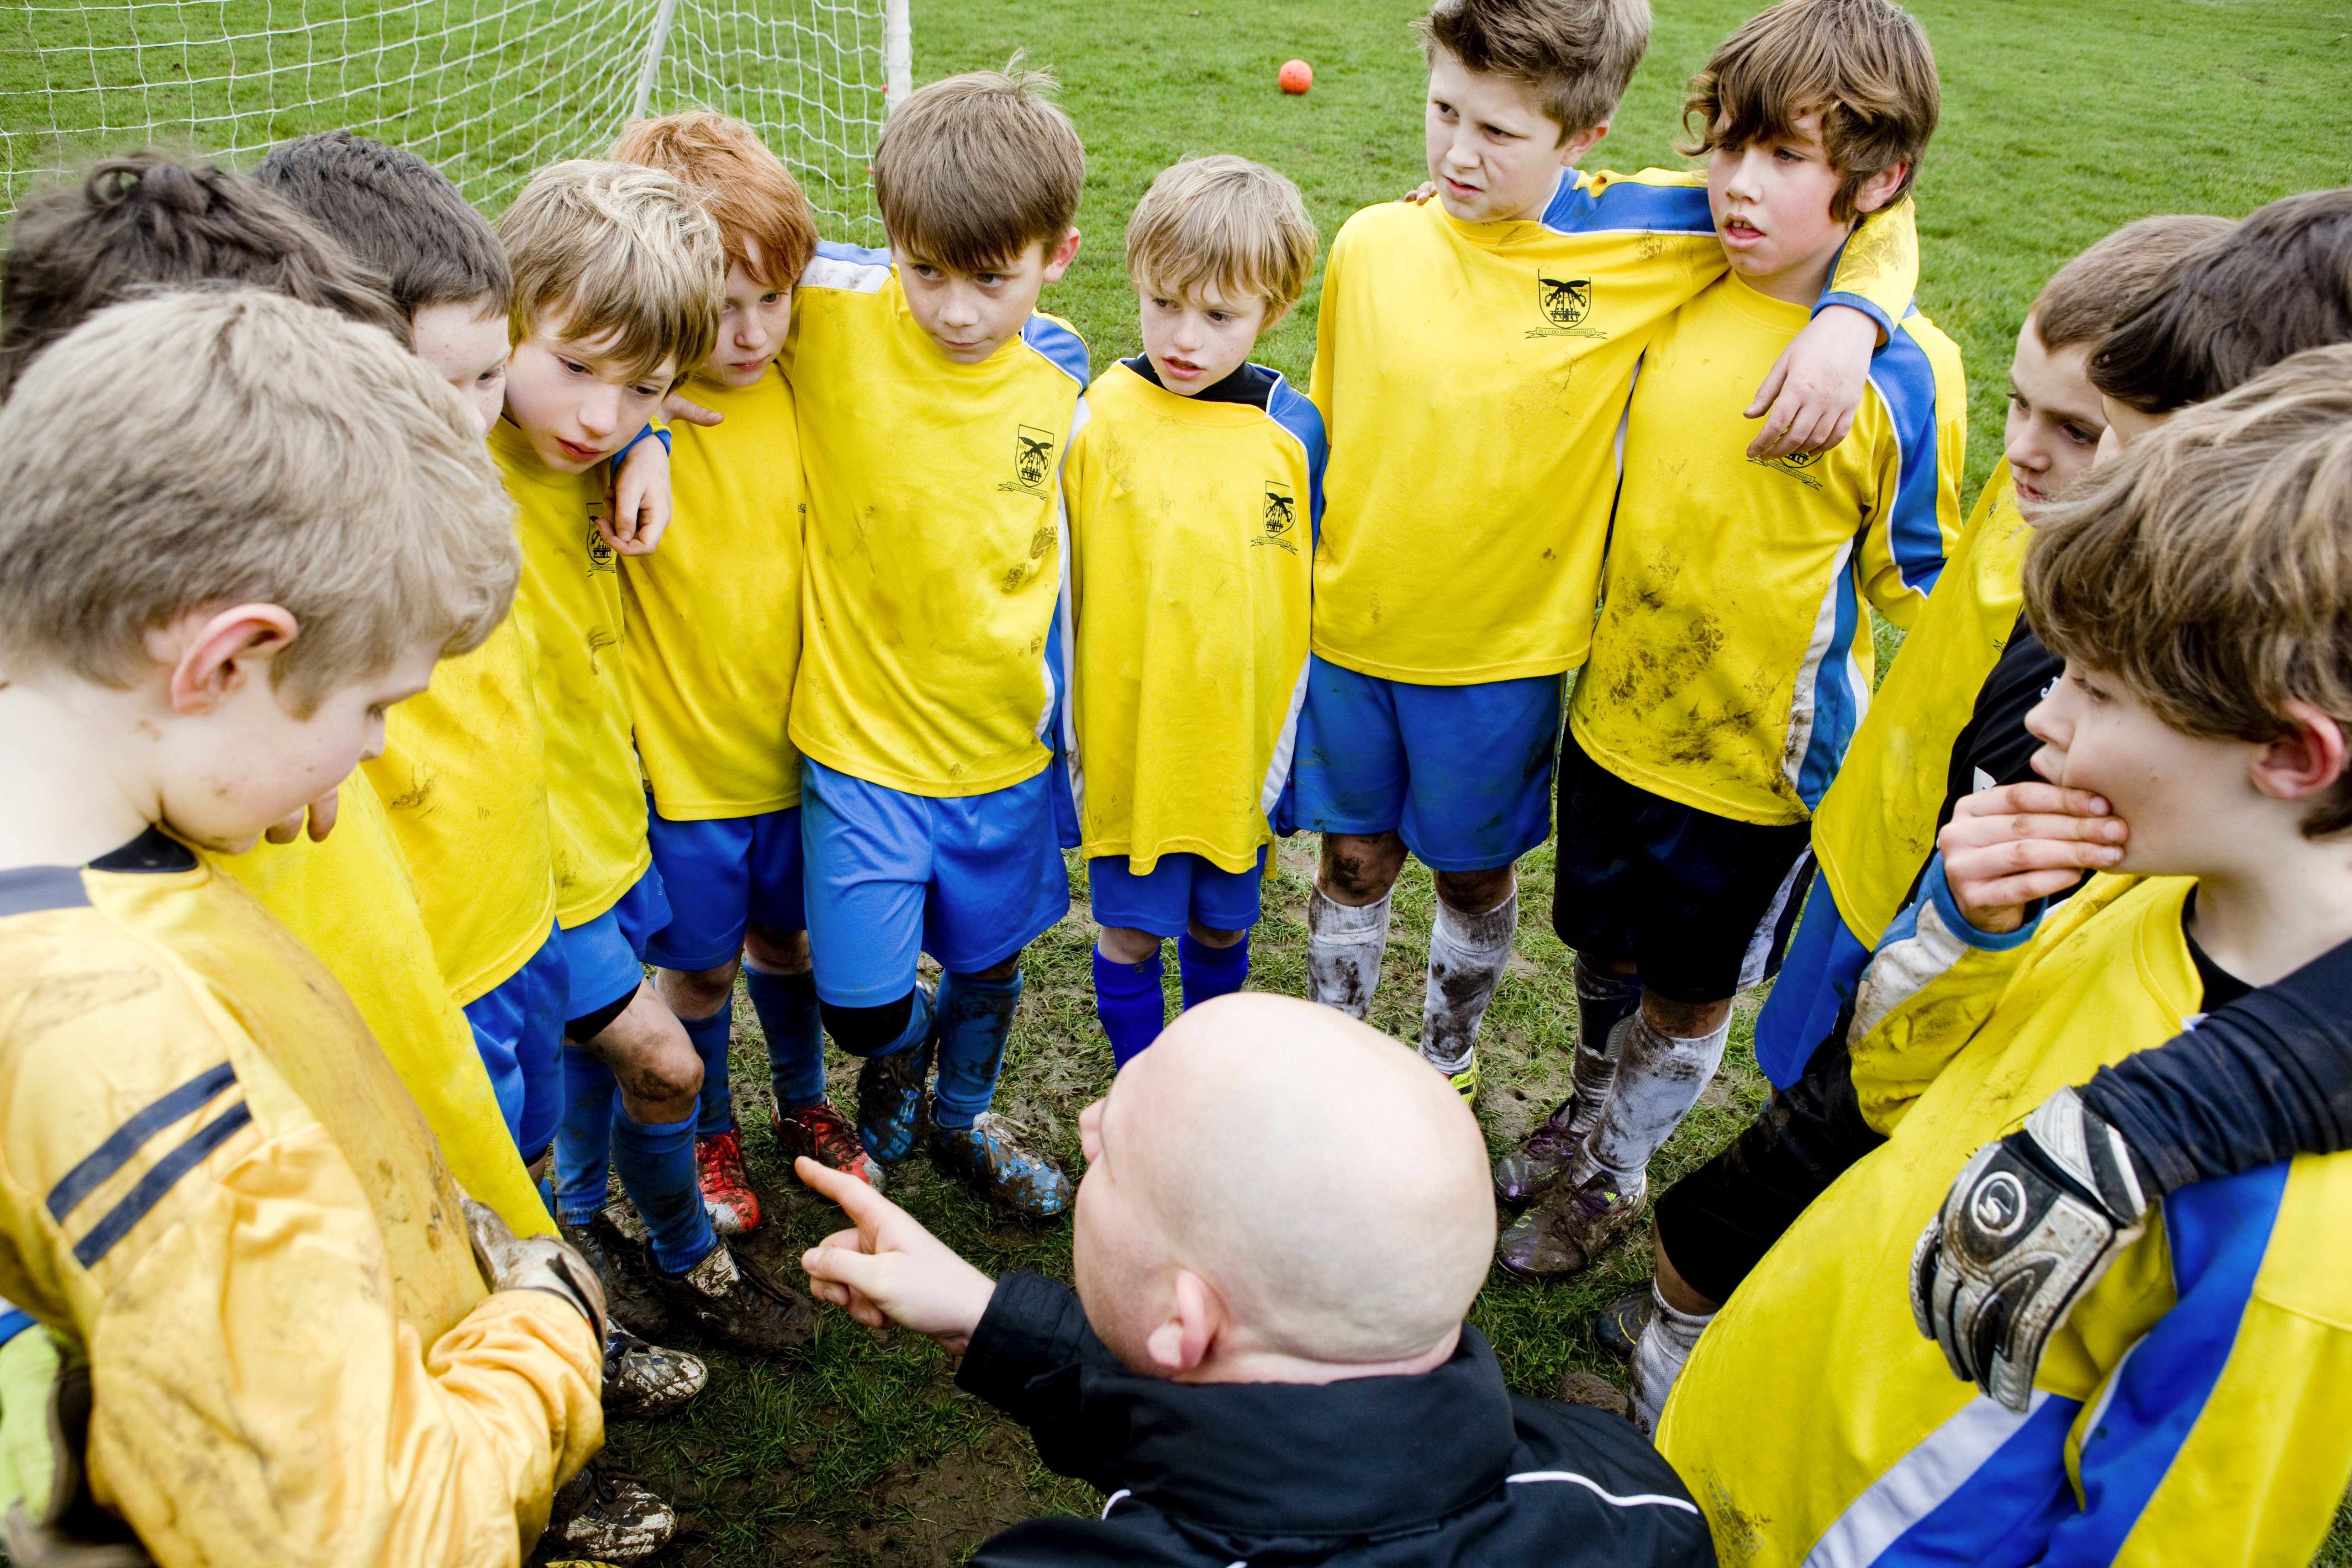 Photo of a football team talk with a coach before the game | Photo: Getty Images